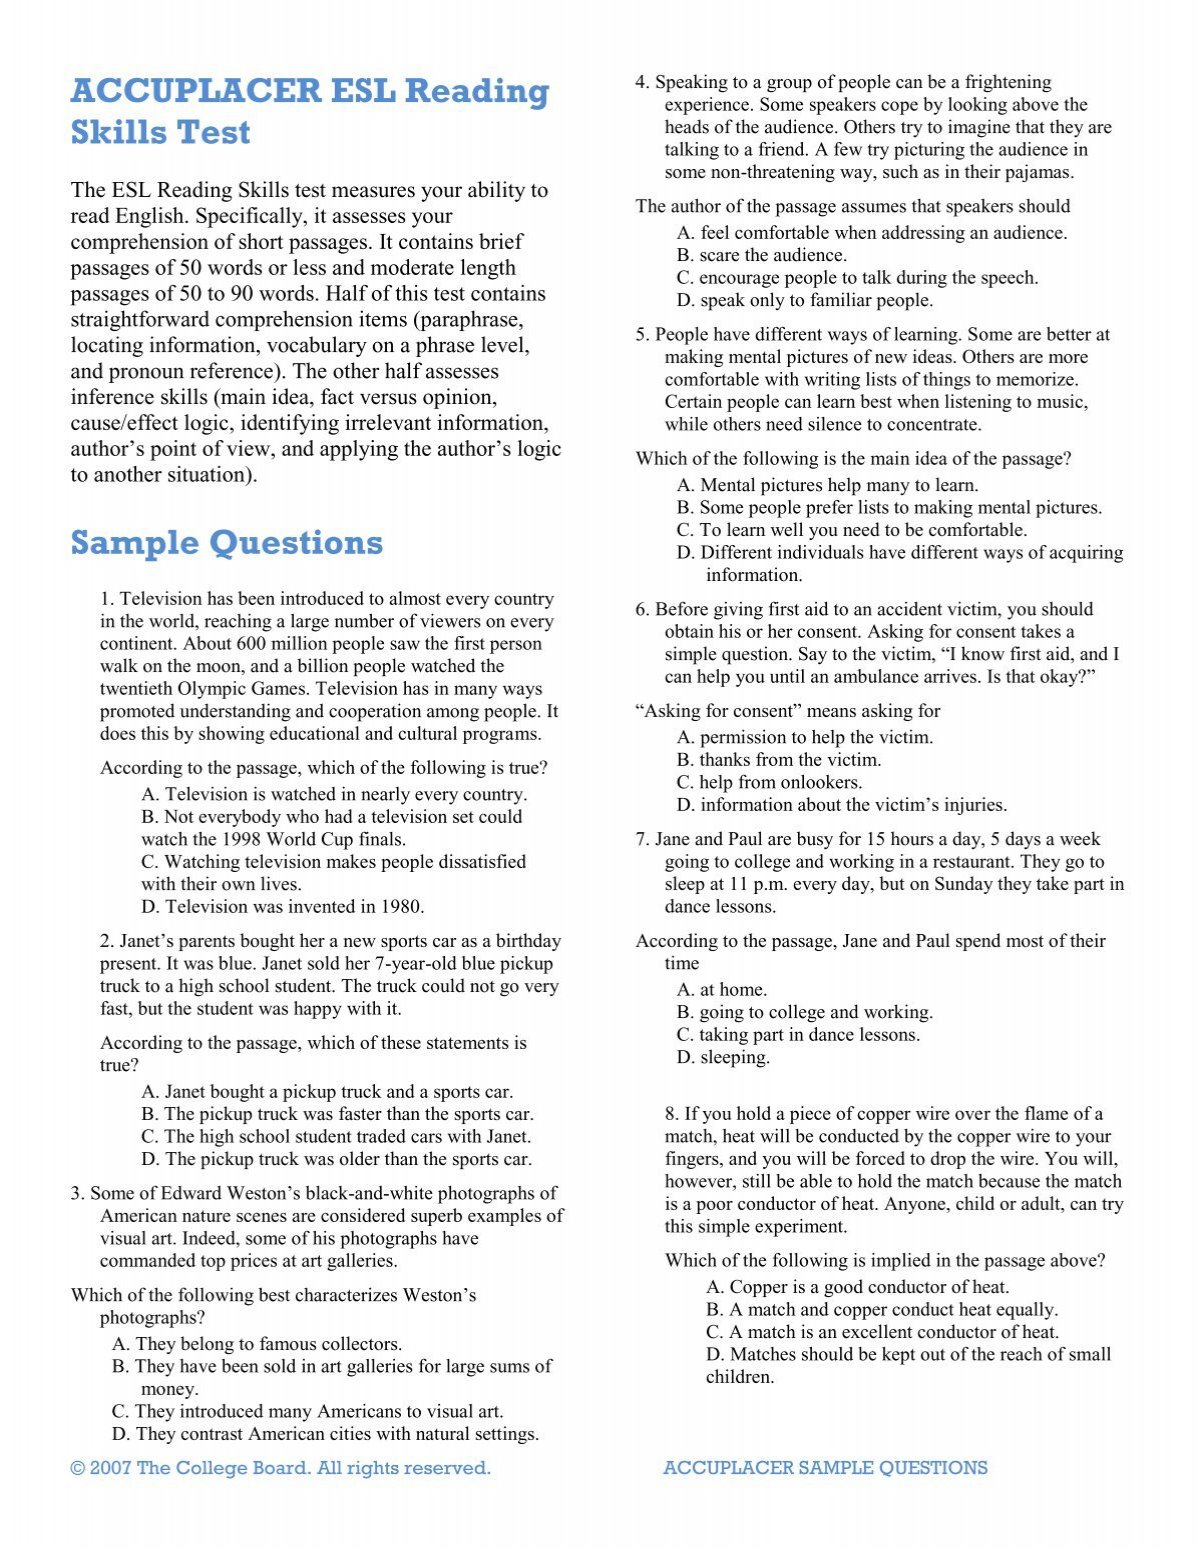 accuplacer-esl-reading-skills-test-sample-questions